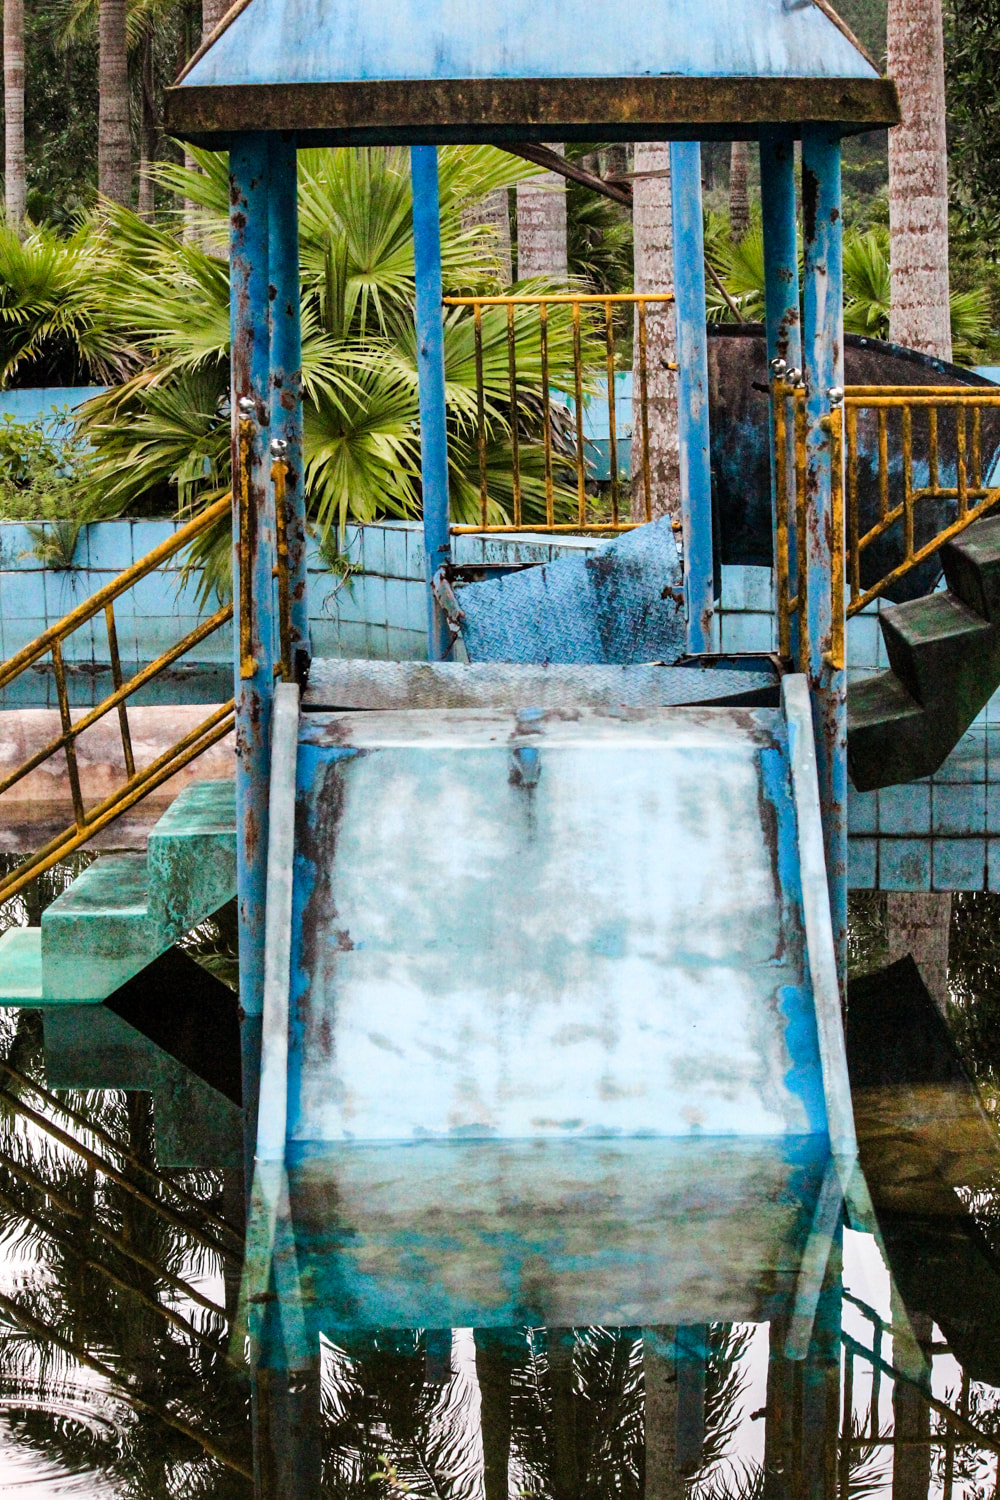 The kiddies pool and mini slides // Hue: Ho Thuy Tien, Photos of Vietnam's Abandoned Water Park.